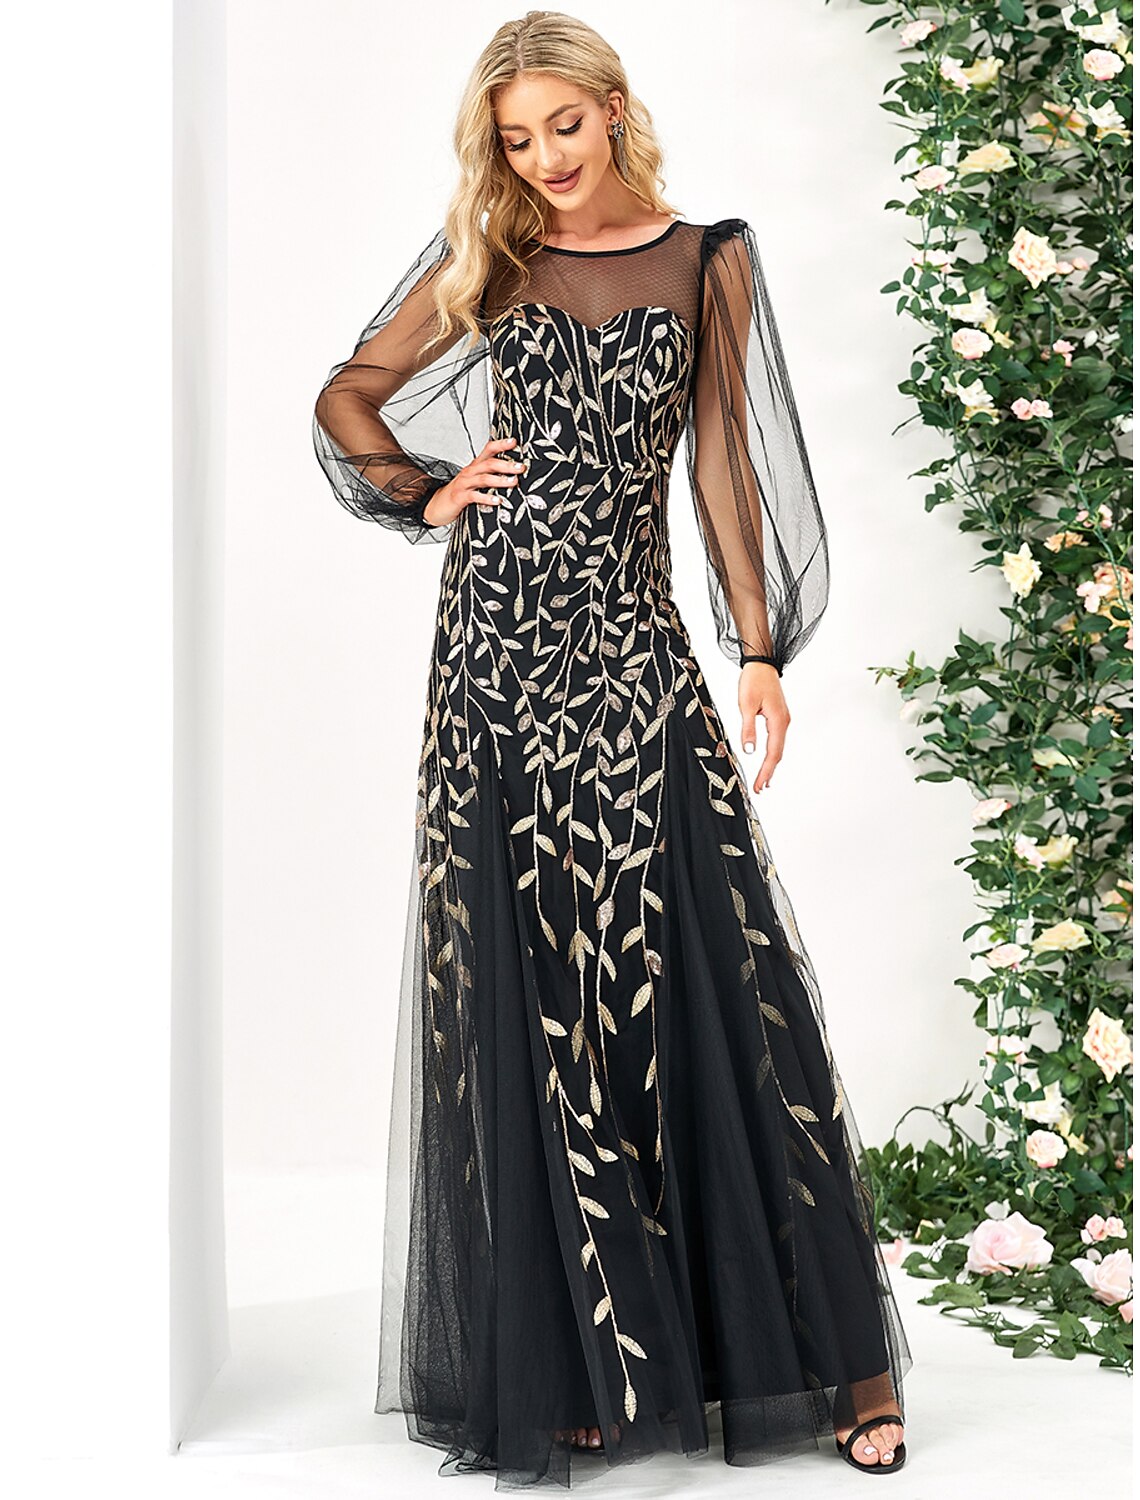 Evening Gown Elegant Dress Formal Floor Length Long Sleeve Jewel Neck Tulle with Sequin